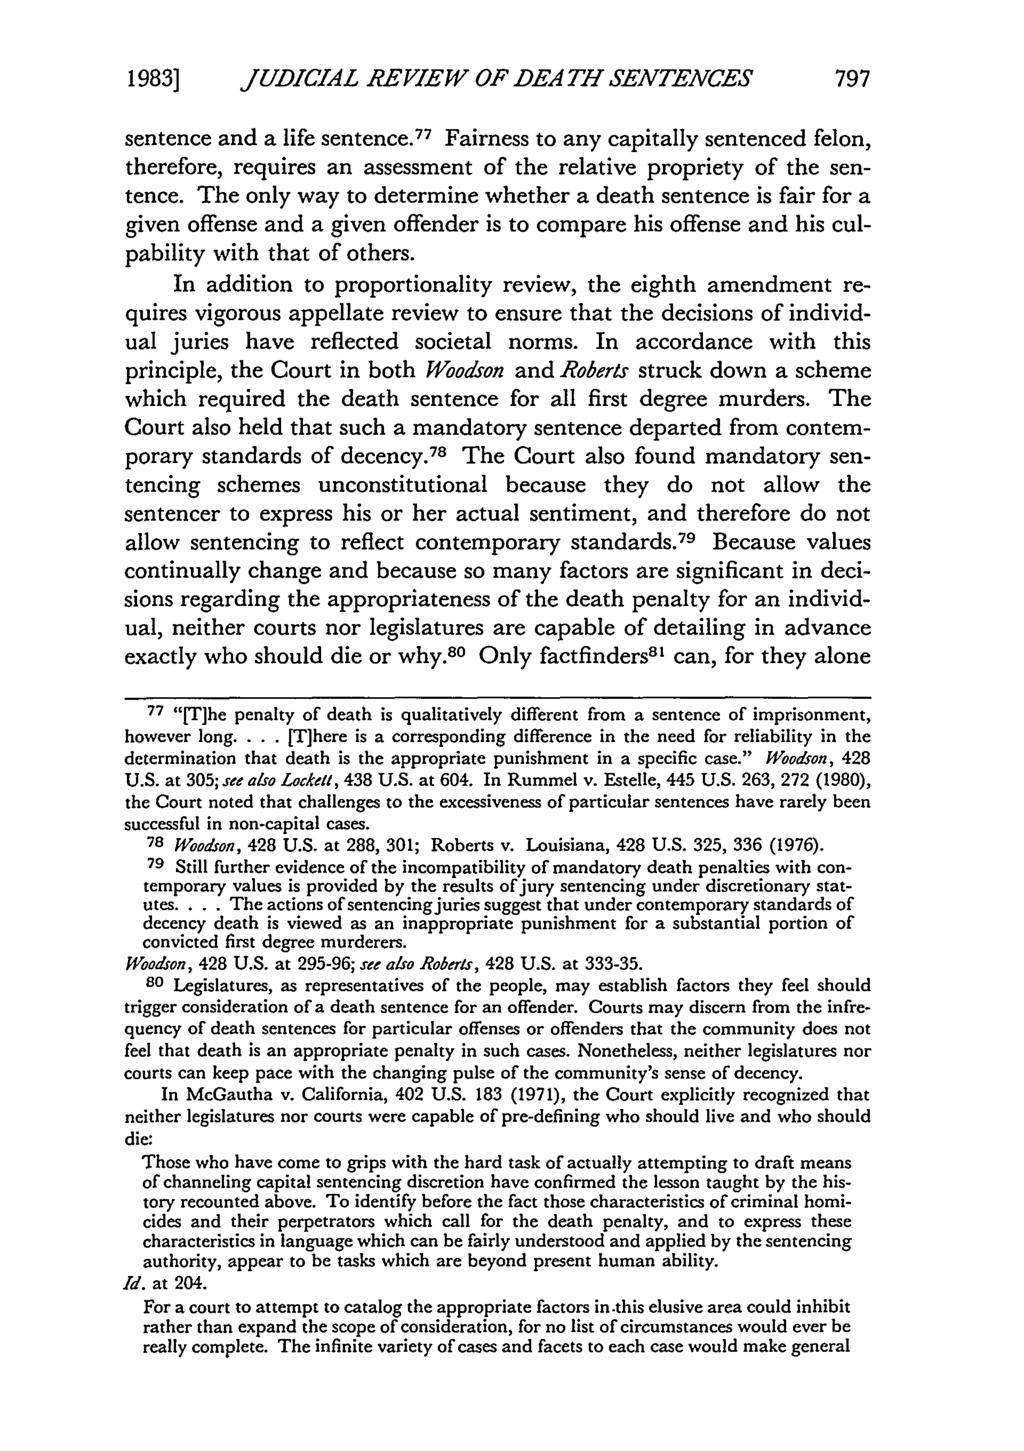 1983] JUDICIAL REVIEW OF DEATH SENTENCES sentence and a life sentence. 77 Fairness to any capitally sentenced felon, therefore, requires an assessment of the relative propriety of the sentence.